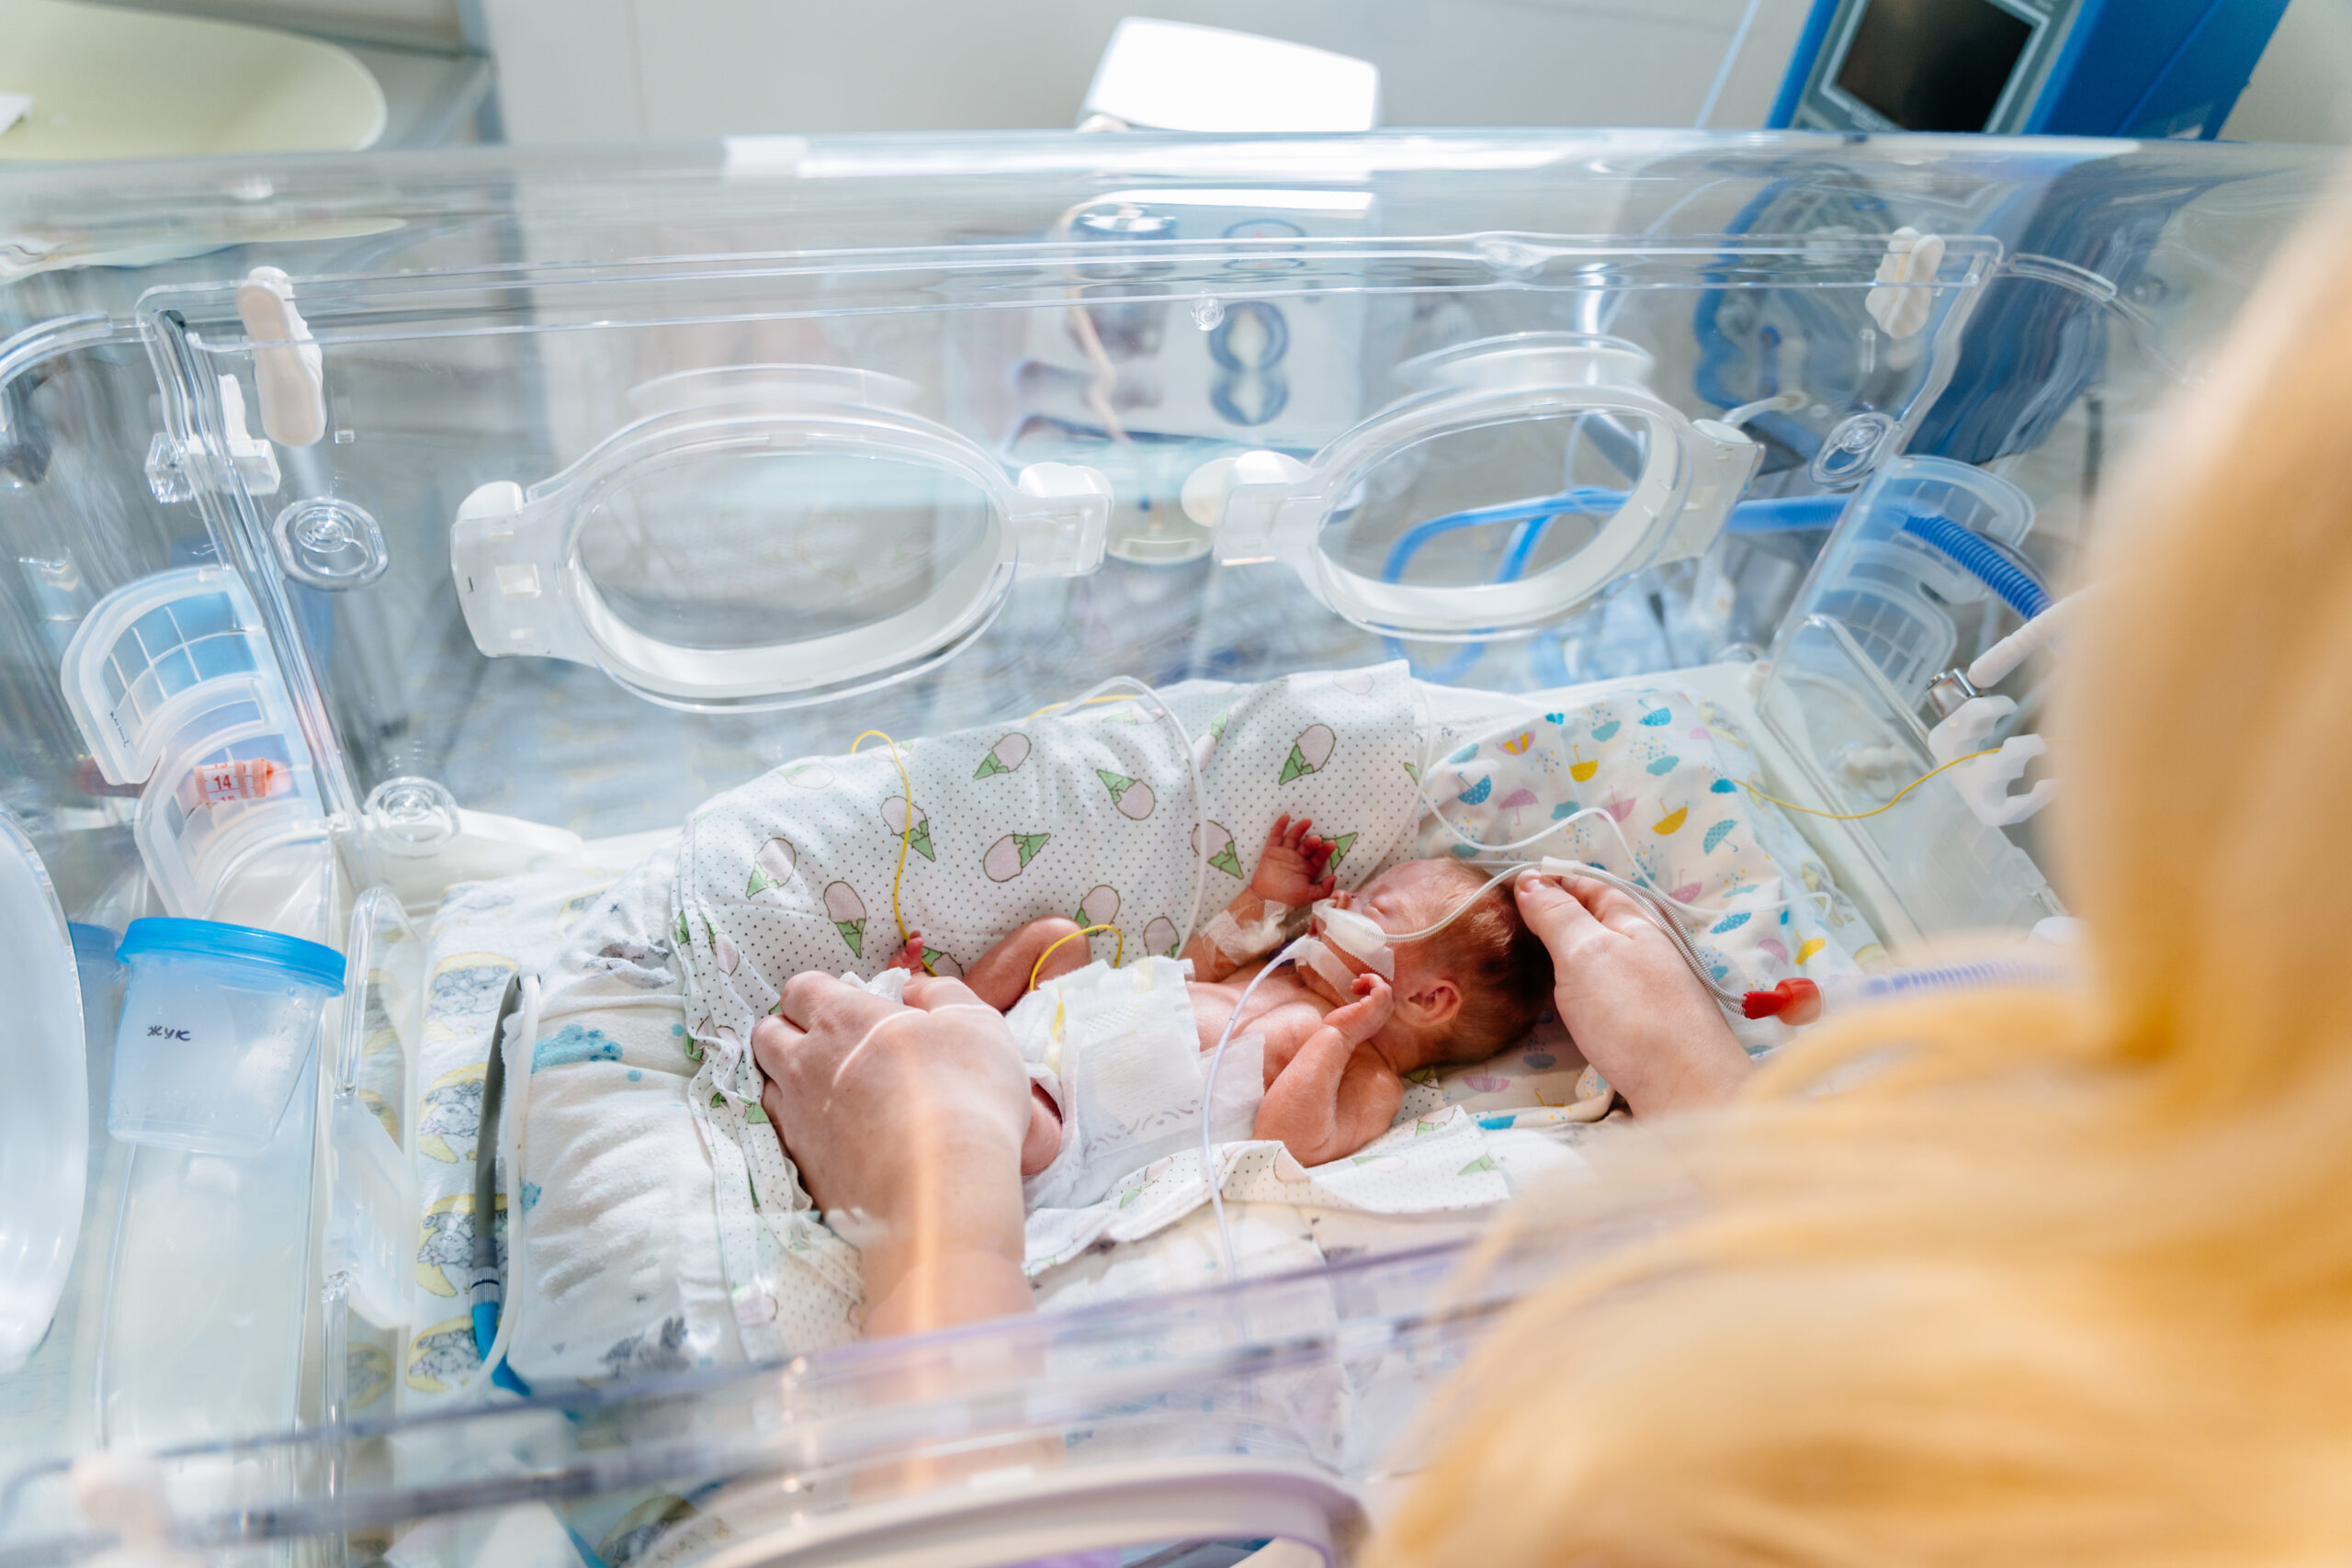 Unrecognizable mother’s hands holding new born baby born at 28 weeks gestation in intensive care unit in a medical incubator.